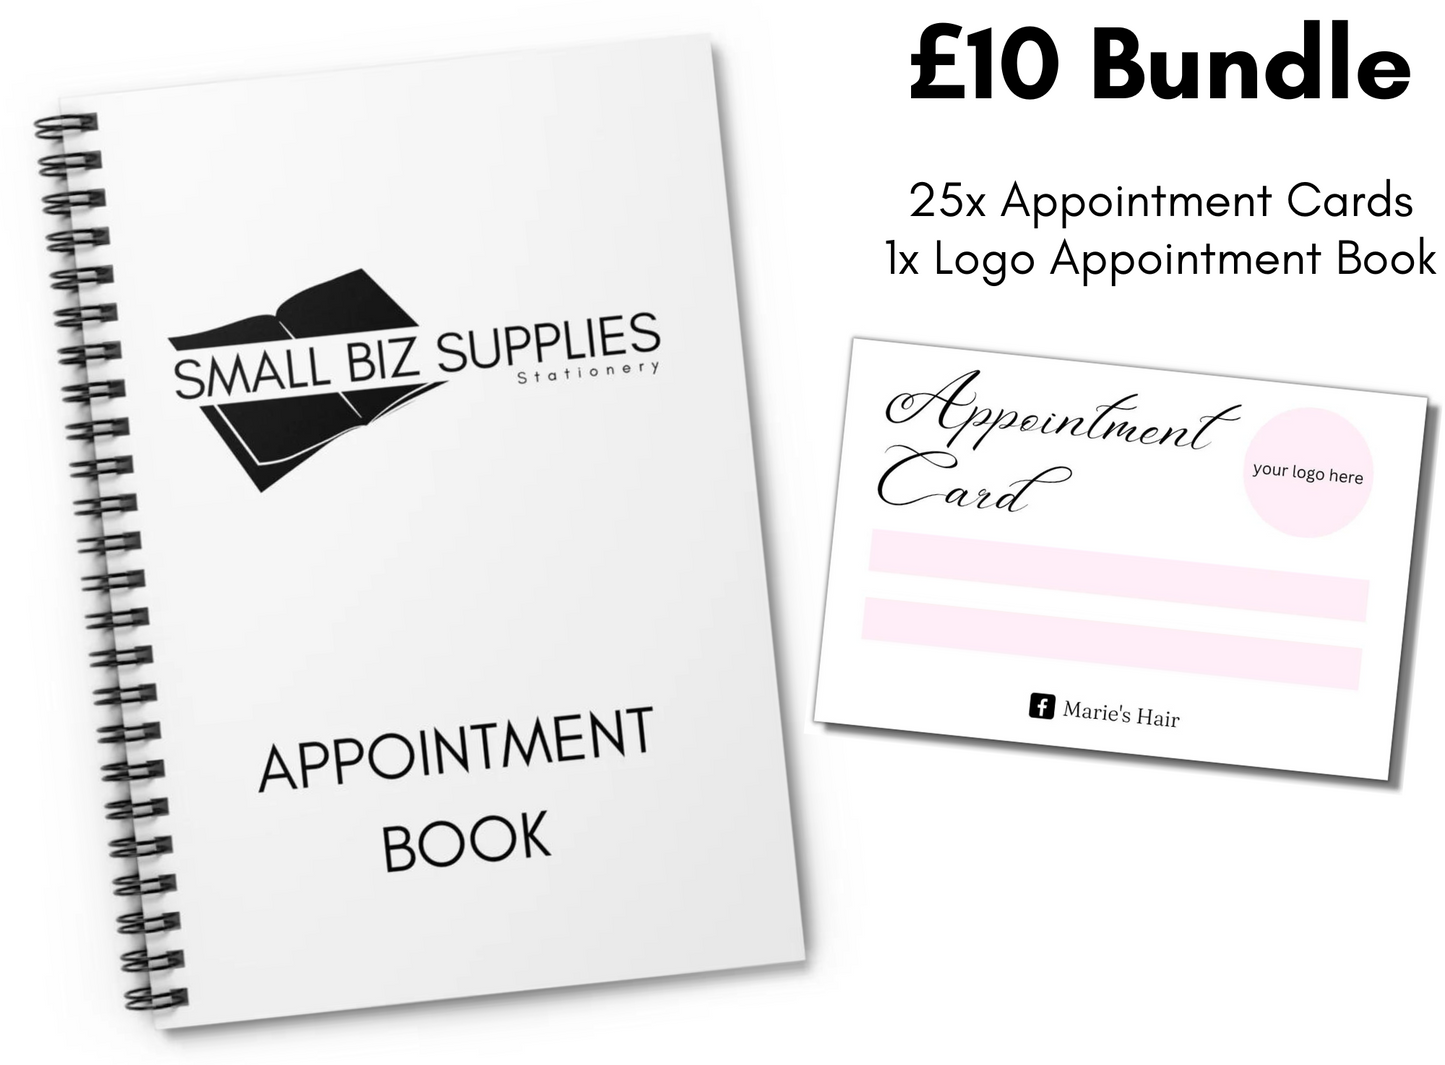 Appointment Book & Cards £10 Bundle